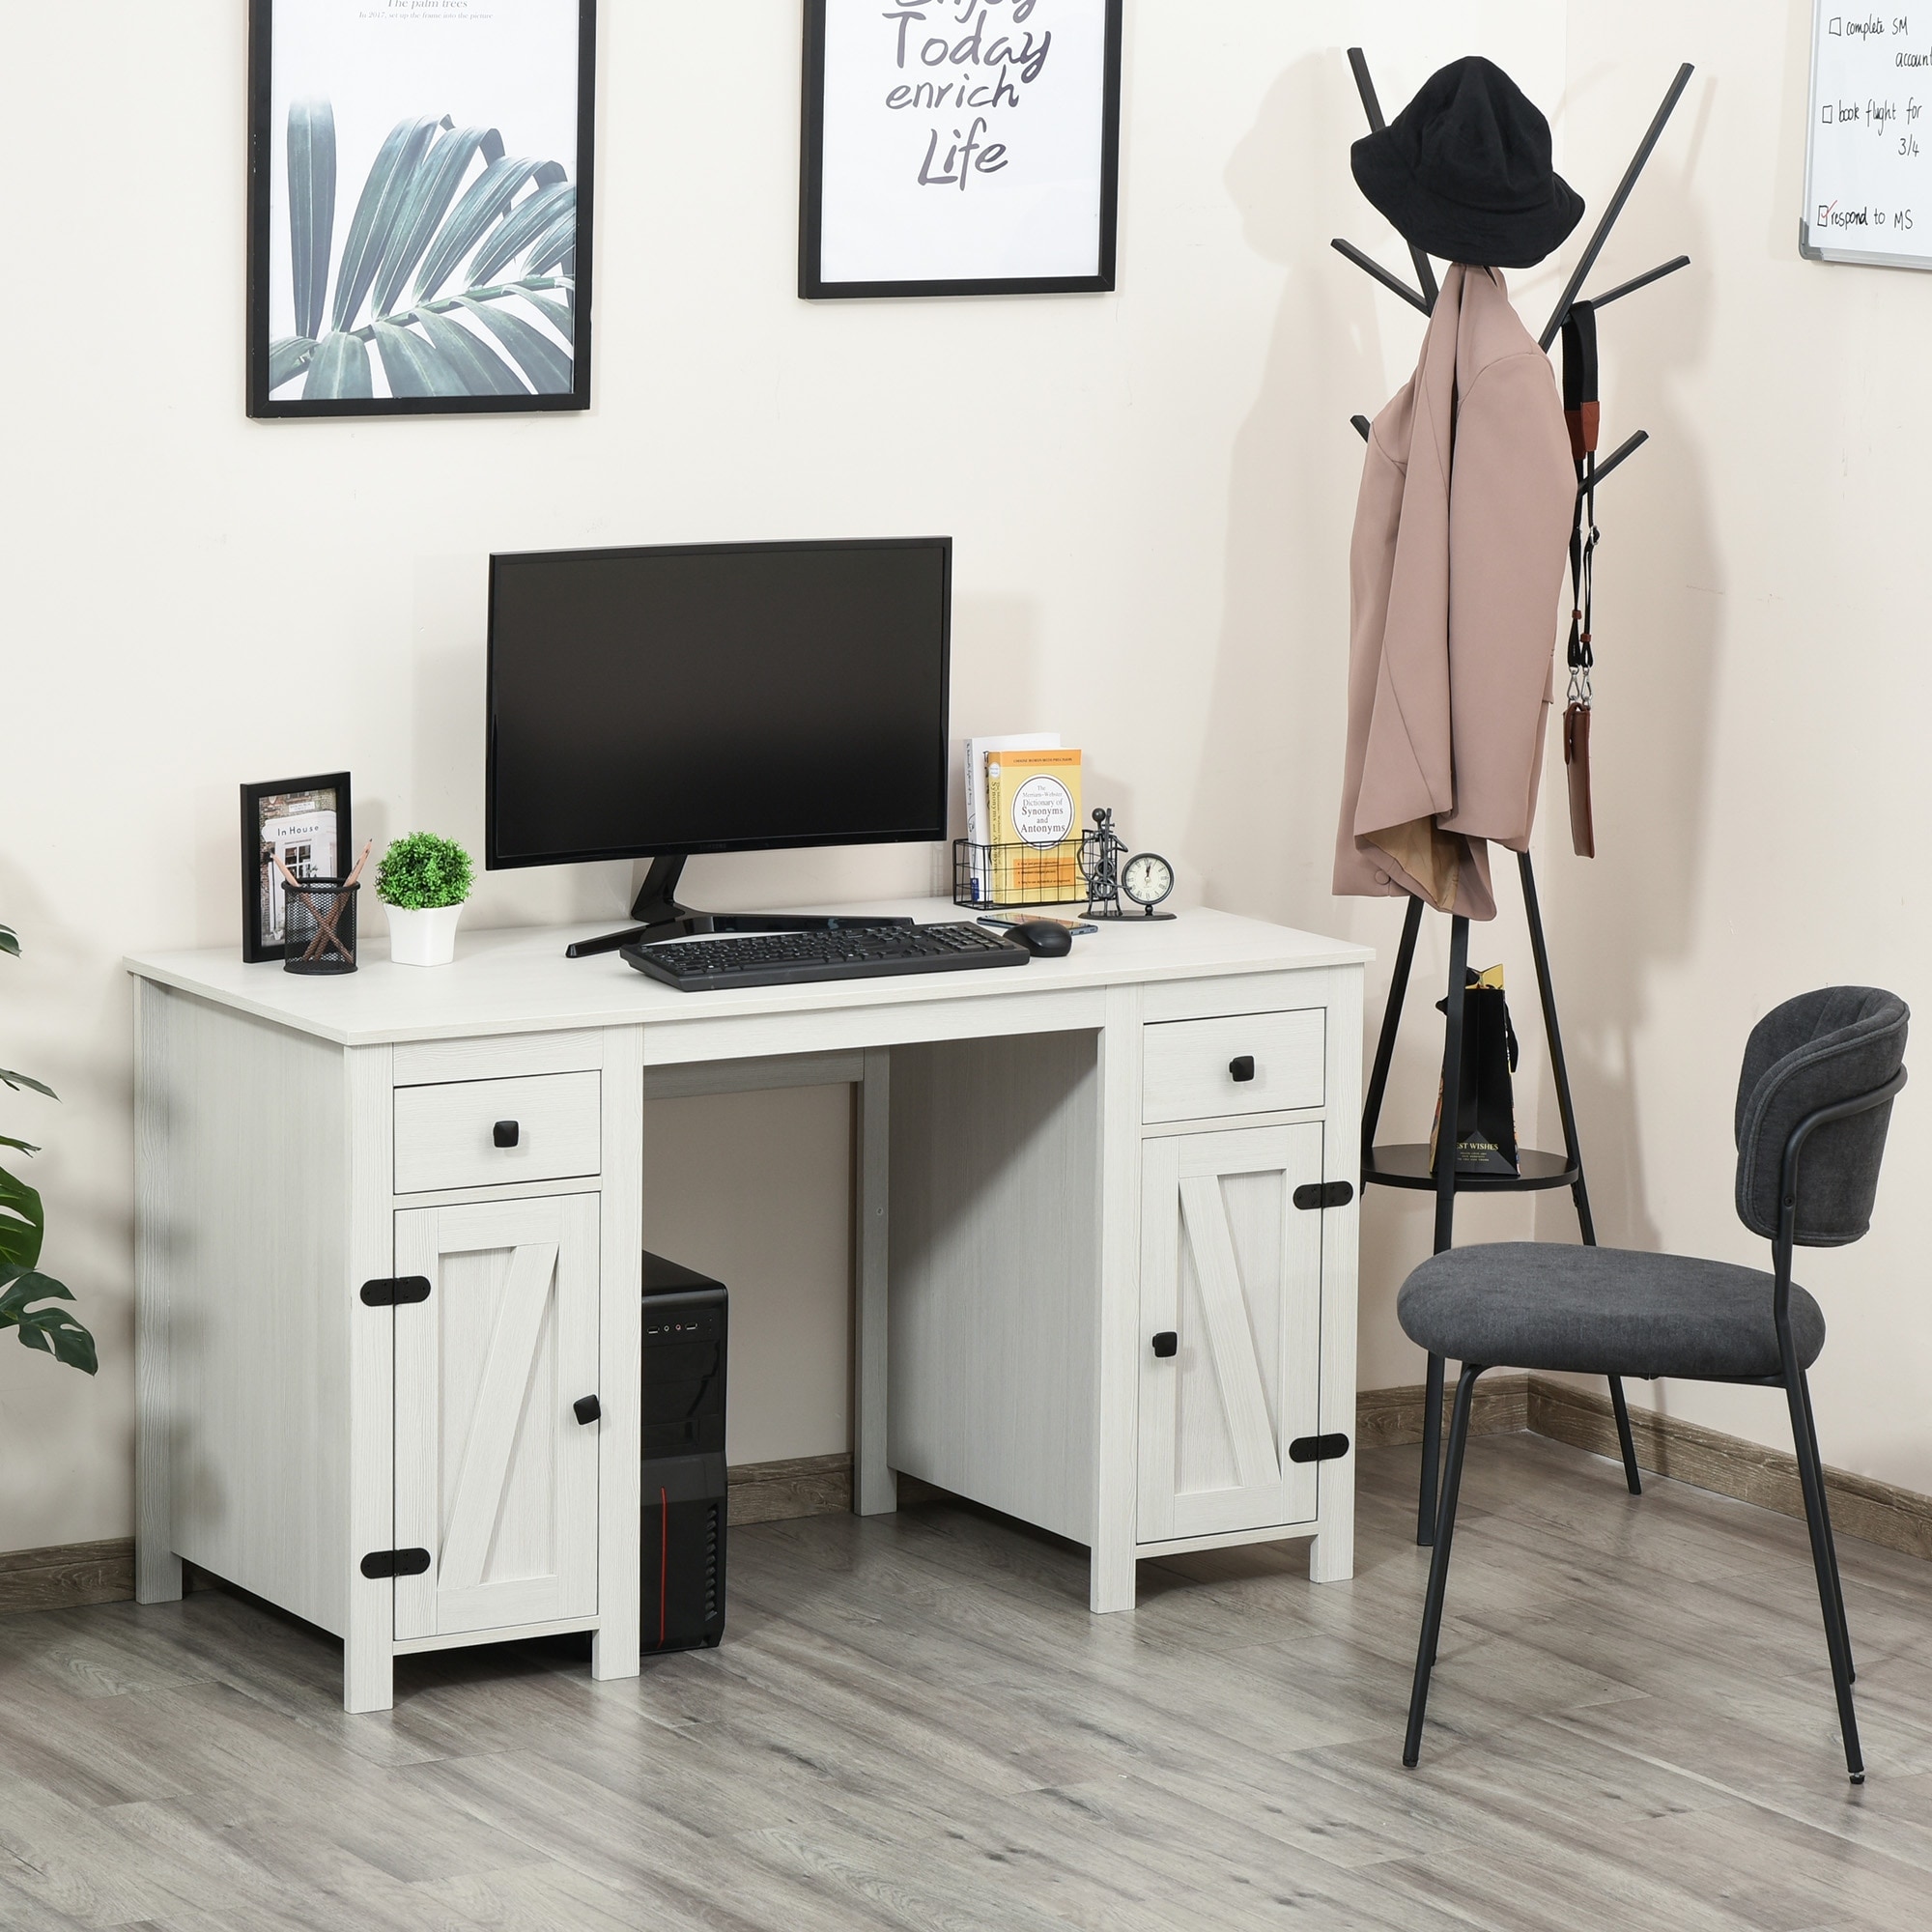 https://ak1.ostkcdn.com/images/products/is/images/direct/1caaad140676d233be41f47f98002dc1428b0daa/HOMCOM-Home-Office-Writing-Desk-with-Storage-Cabinet%2C-Drawer%2C-PC-Study-Table-Computer-Workstation%2C-White-Wood-Grain.jpg